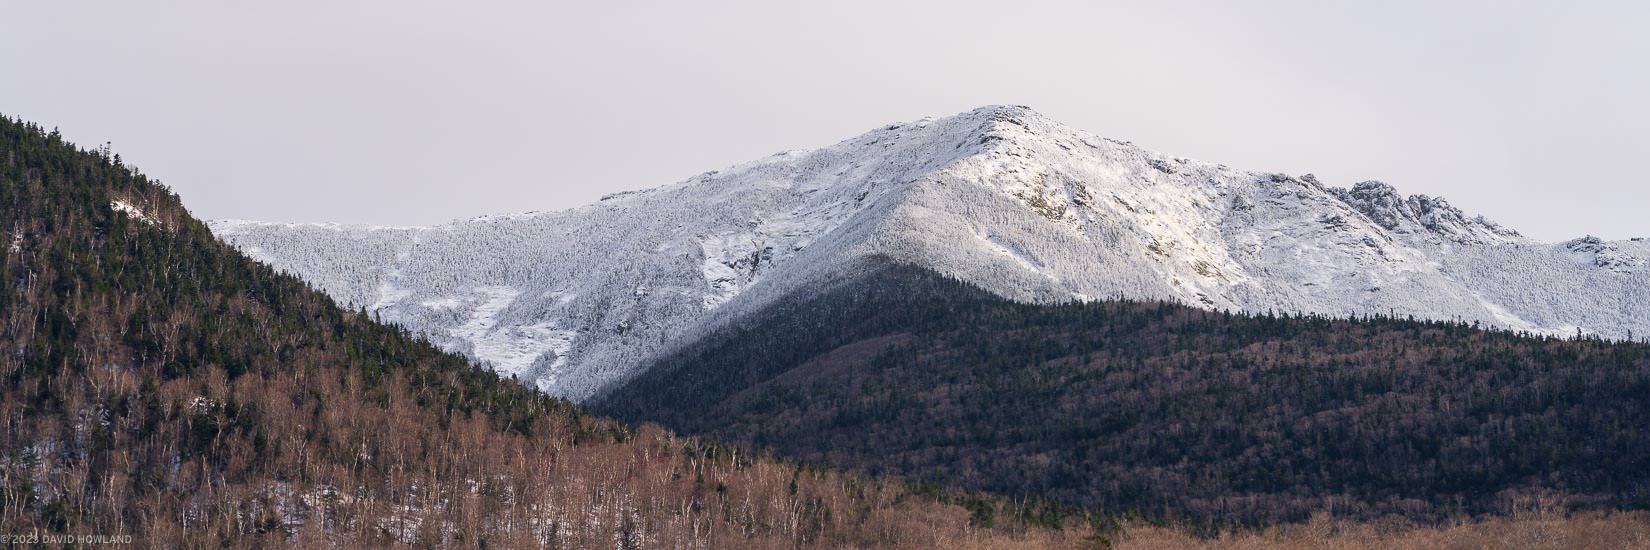 A panorama photo of snow and ice covering Mount Lincoln in the White Mountains of New Hampshire.